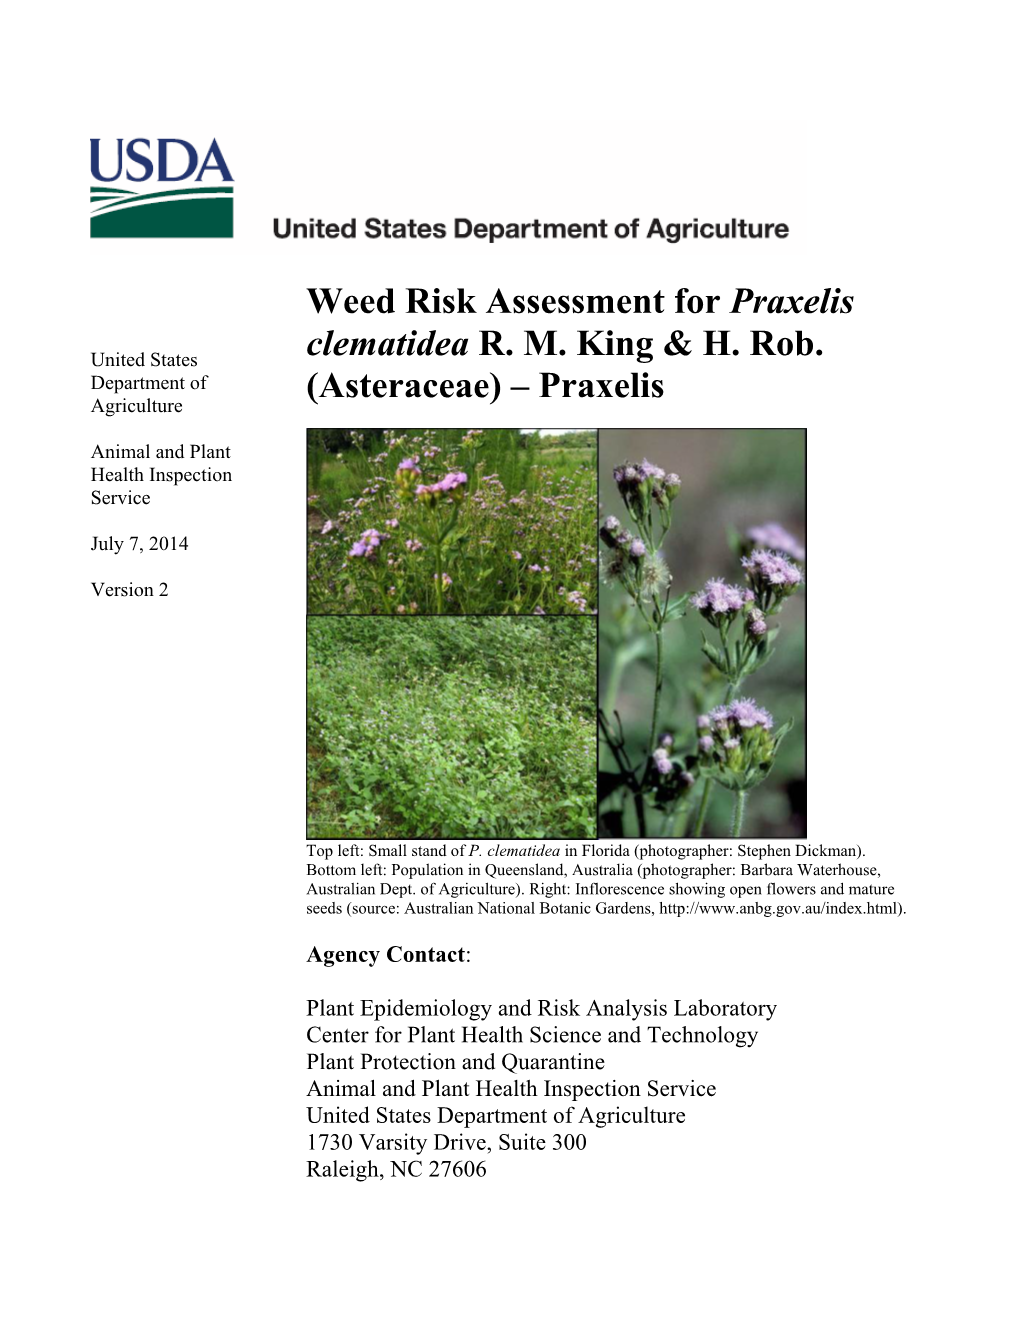 Weed Risk Assessment for Praxelis Clematidea RM King & H. Rob